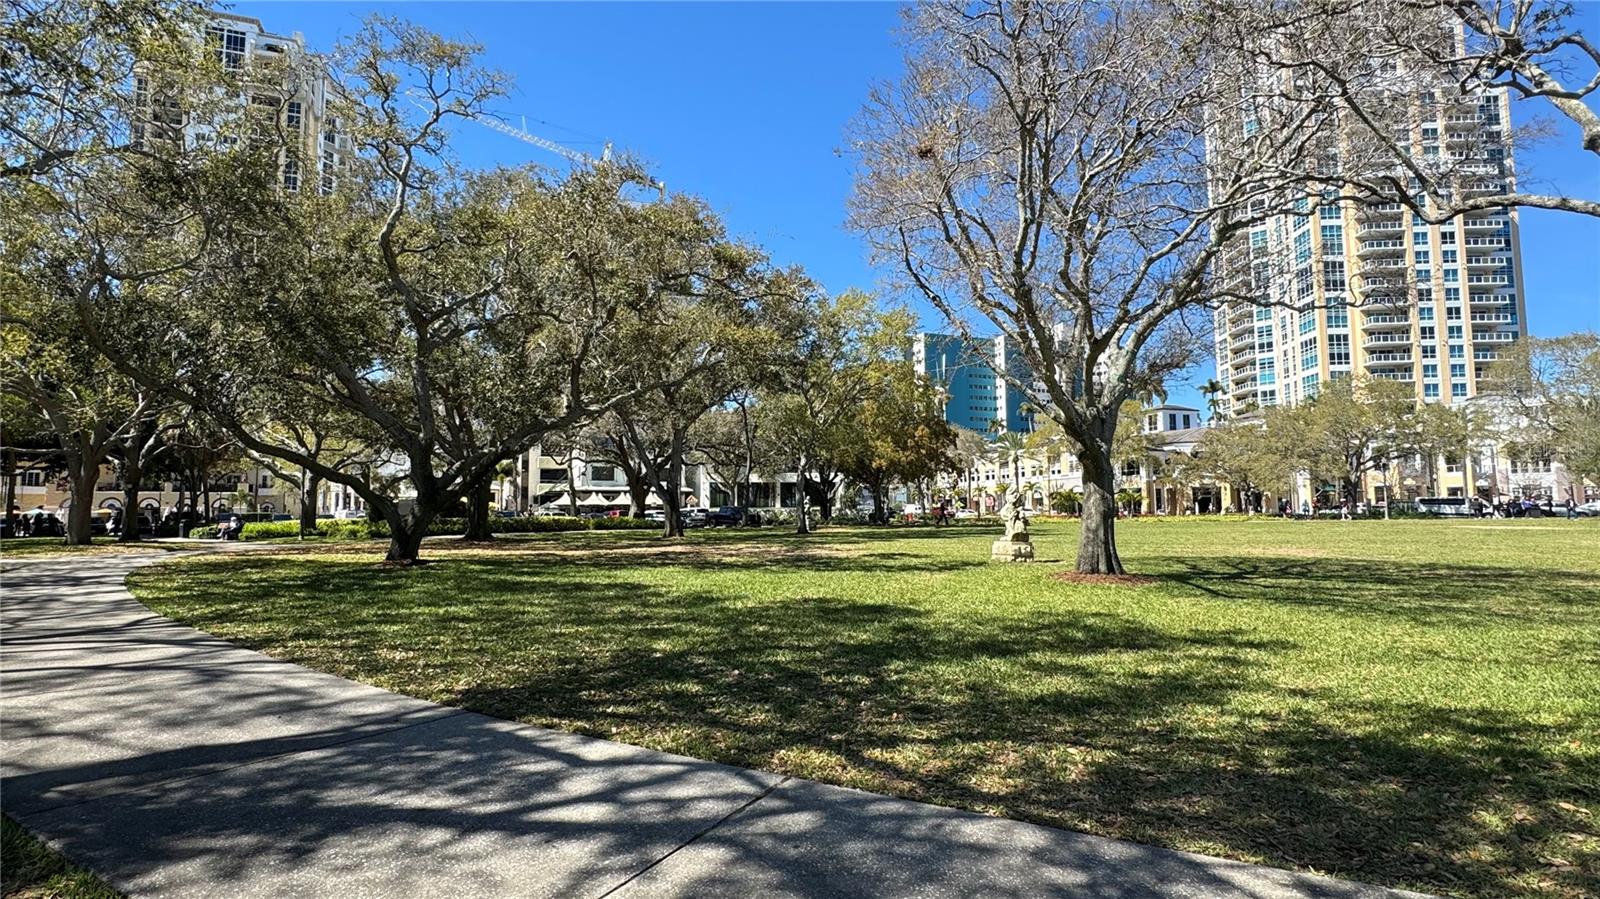 Downtown St Petersburg's Straub Park looking towards the many shops and restaurants on Beach Drive.